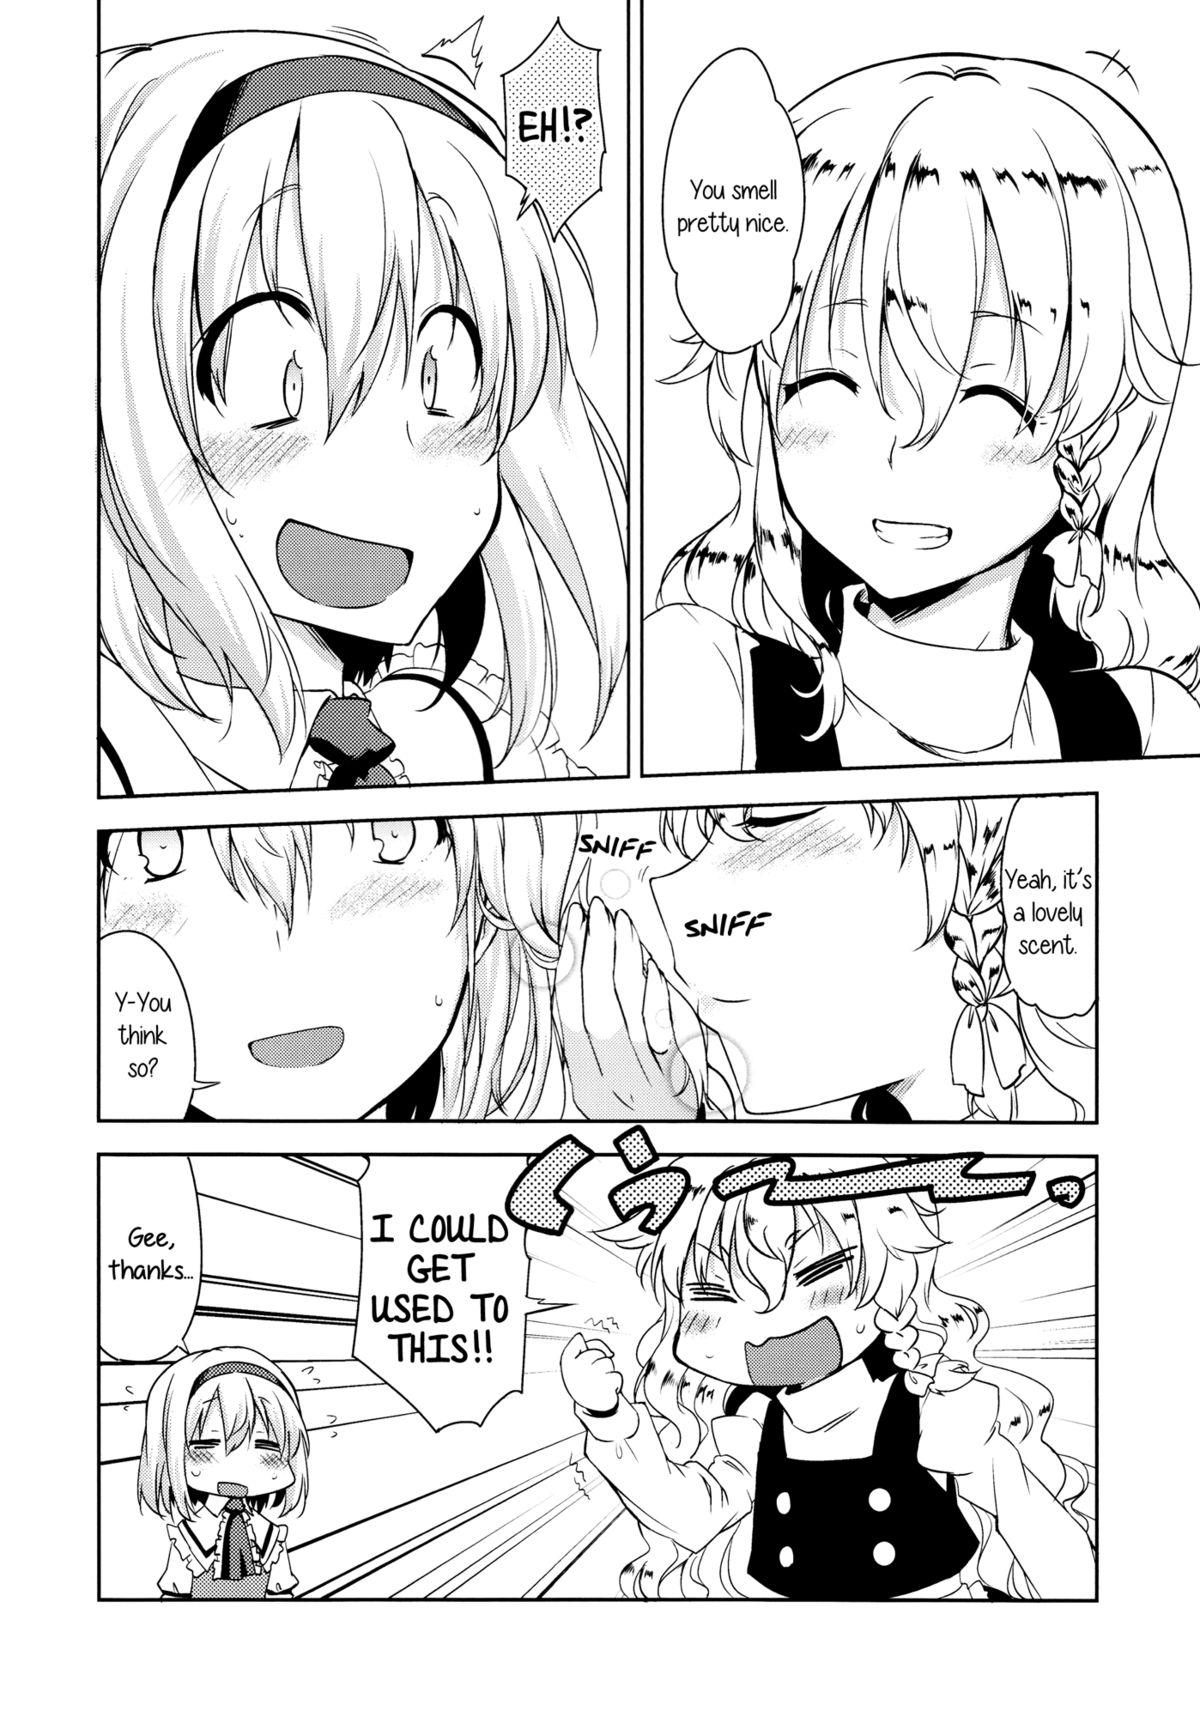 Oral perfume - Touhou project Tgirls - Page 5